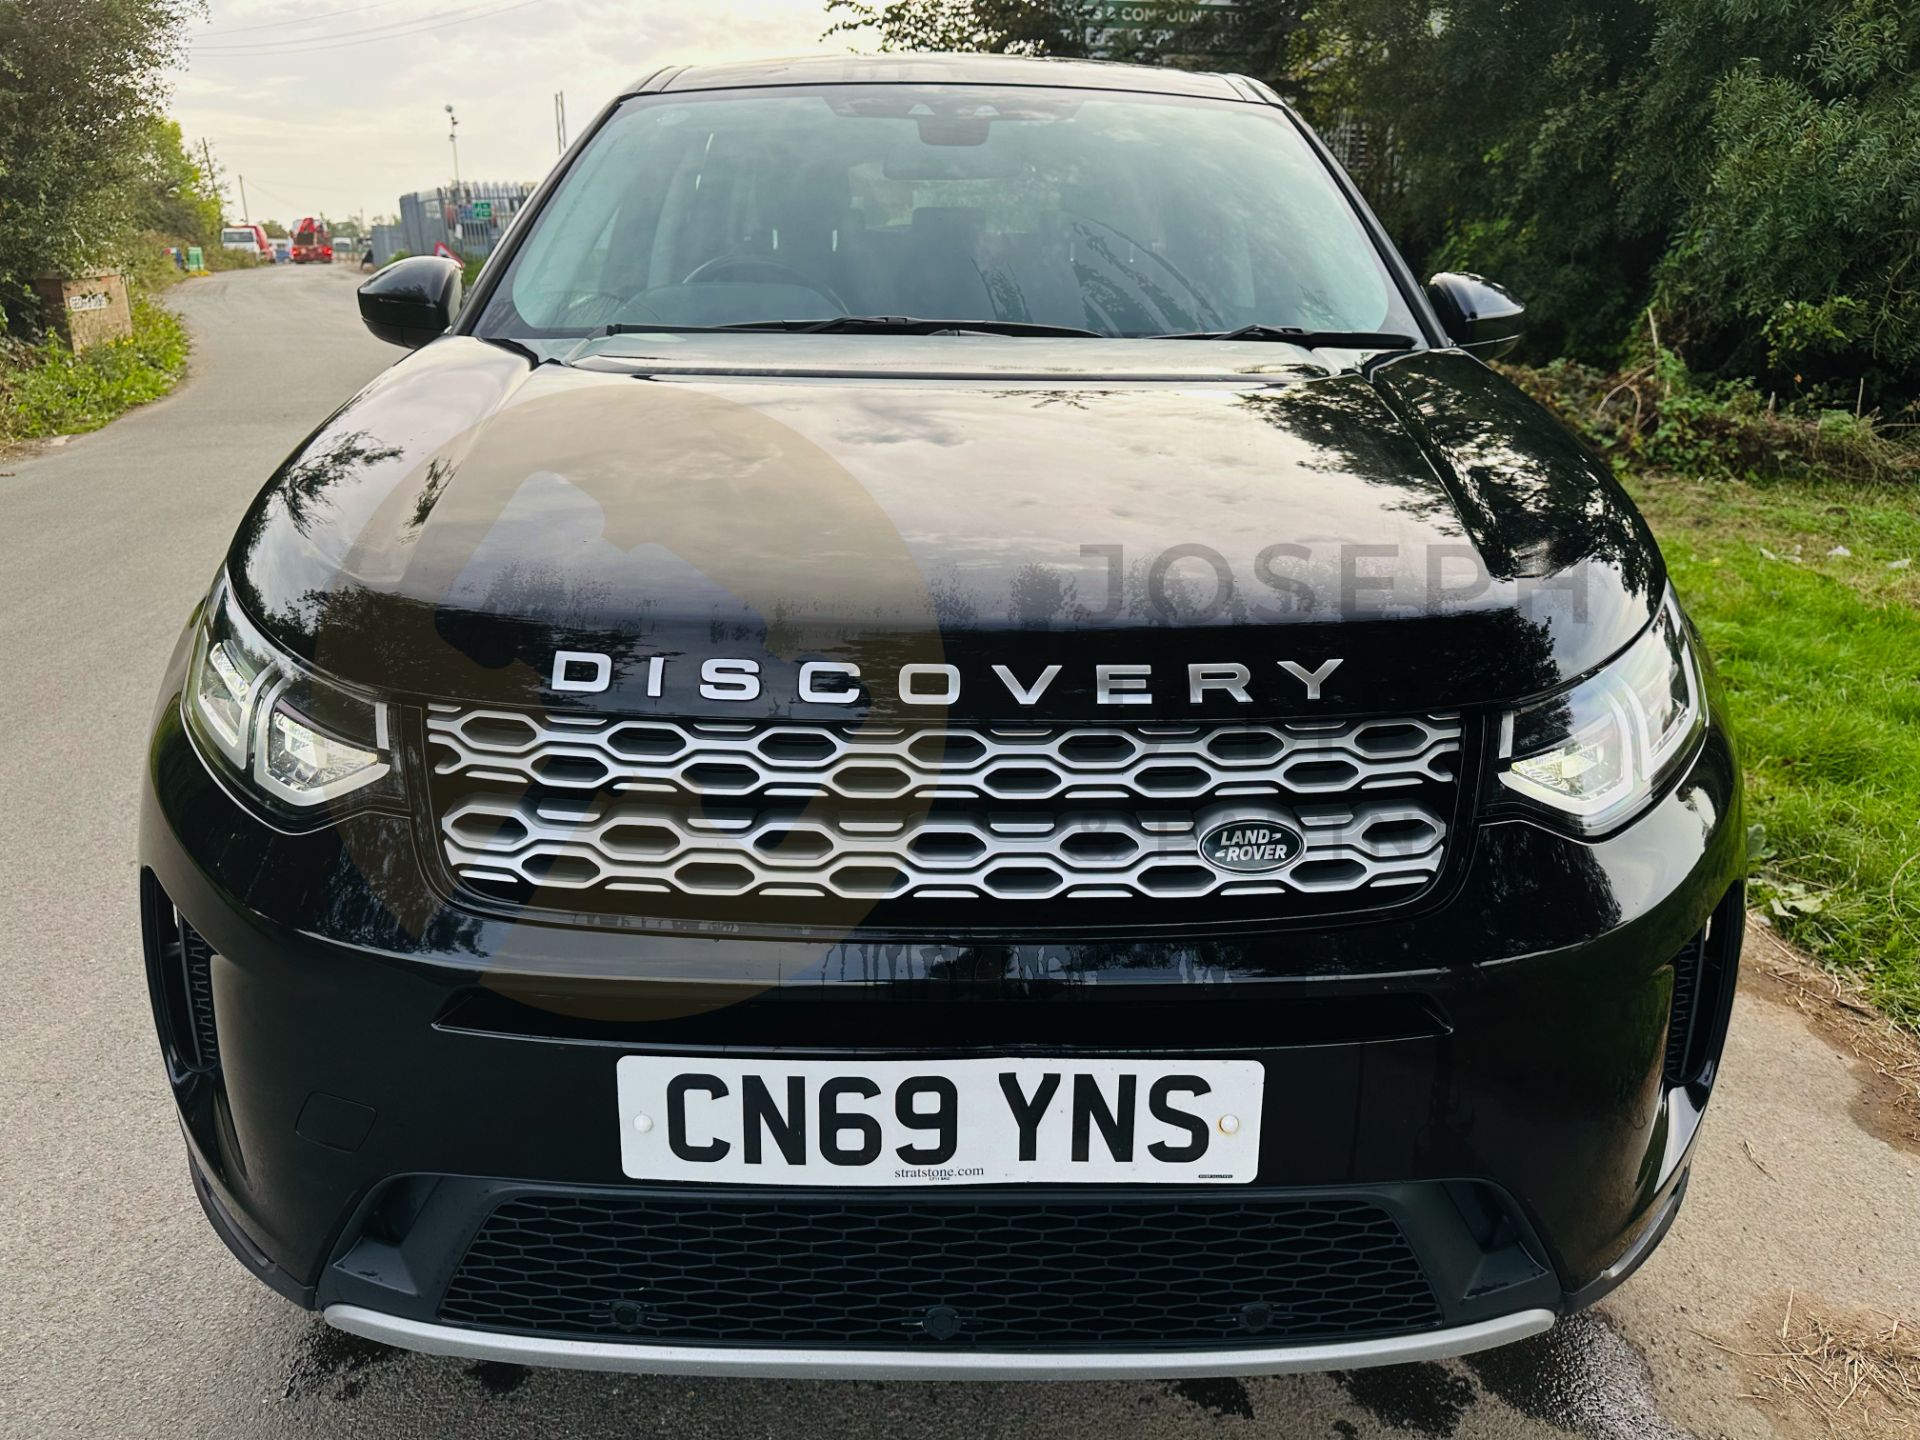 ON SALE LAND ROVER DISCOVERY SPORT (69 REG) - *2020 FACELIFT MODEL* - 1 OWNER FROM NEW - Image 4 of 39